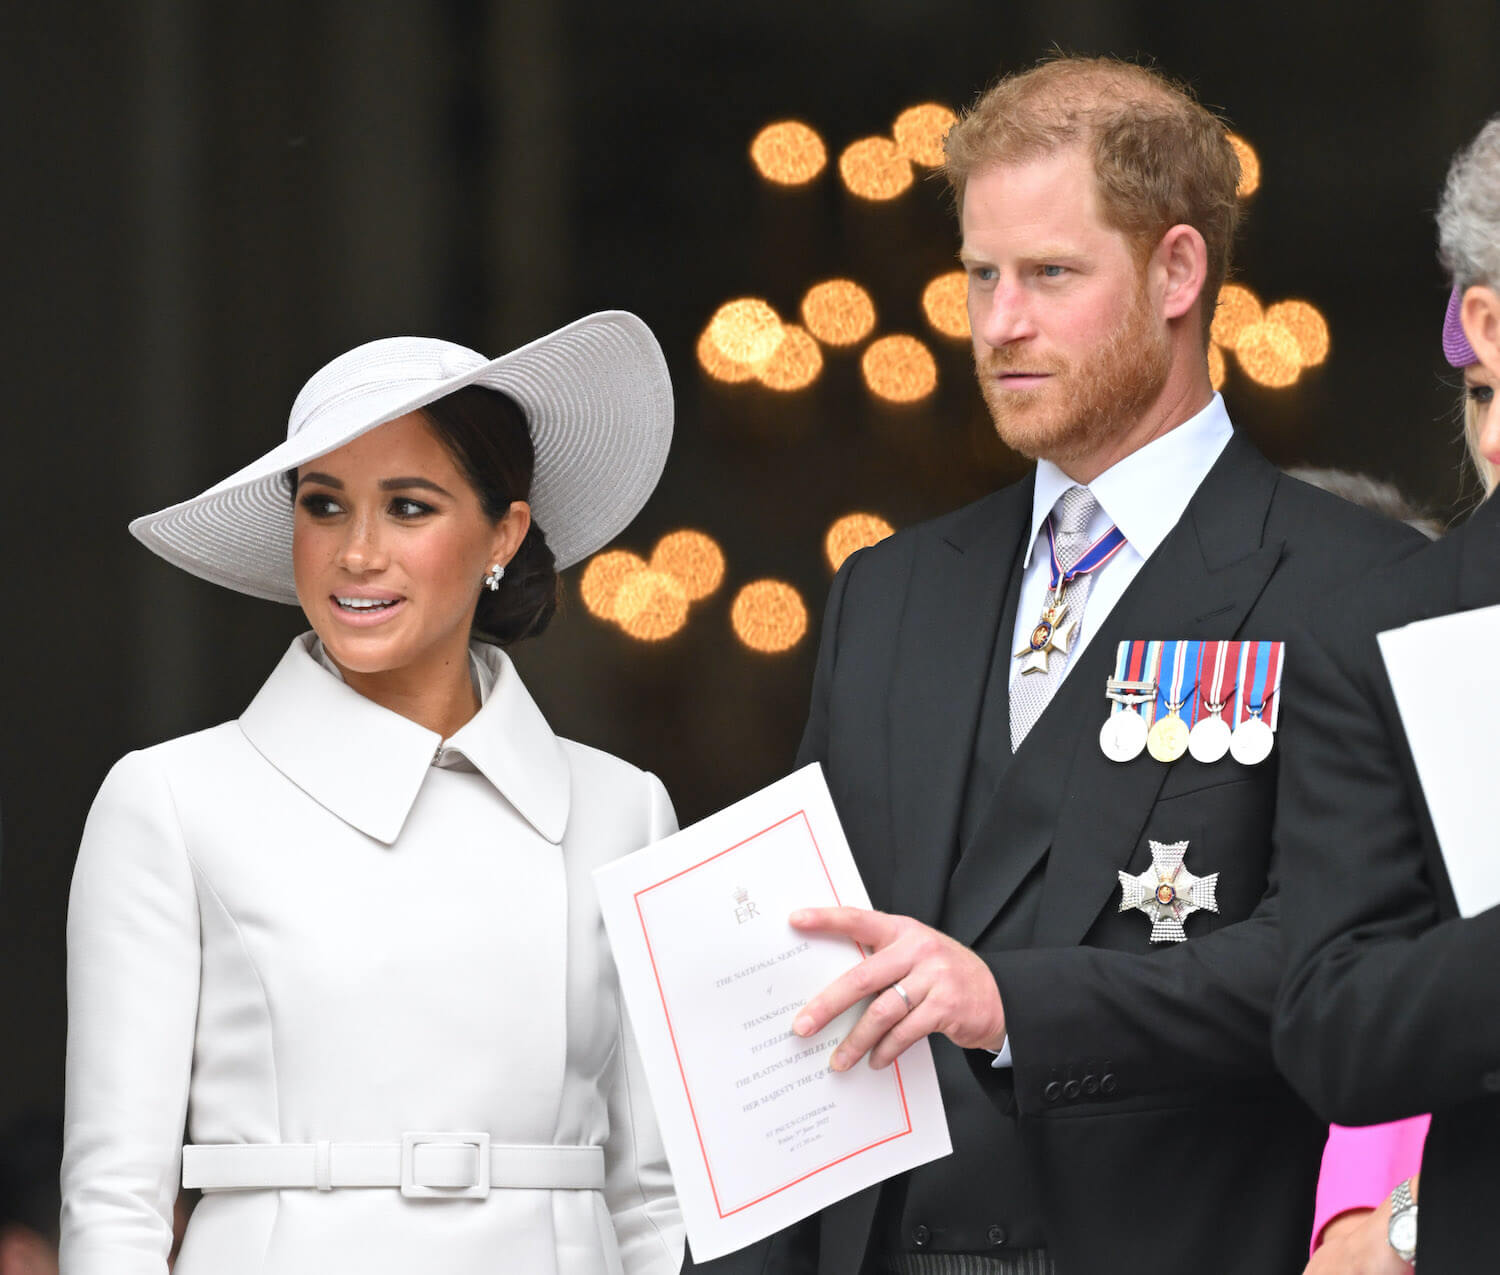 Royals Advised to Follow ‘Self-Preservation’ Strategy if Prince Harry and Meghan Markle Attend Coronation